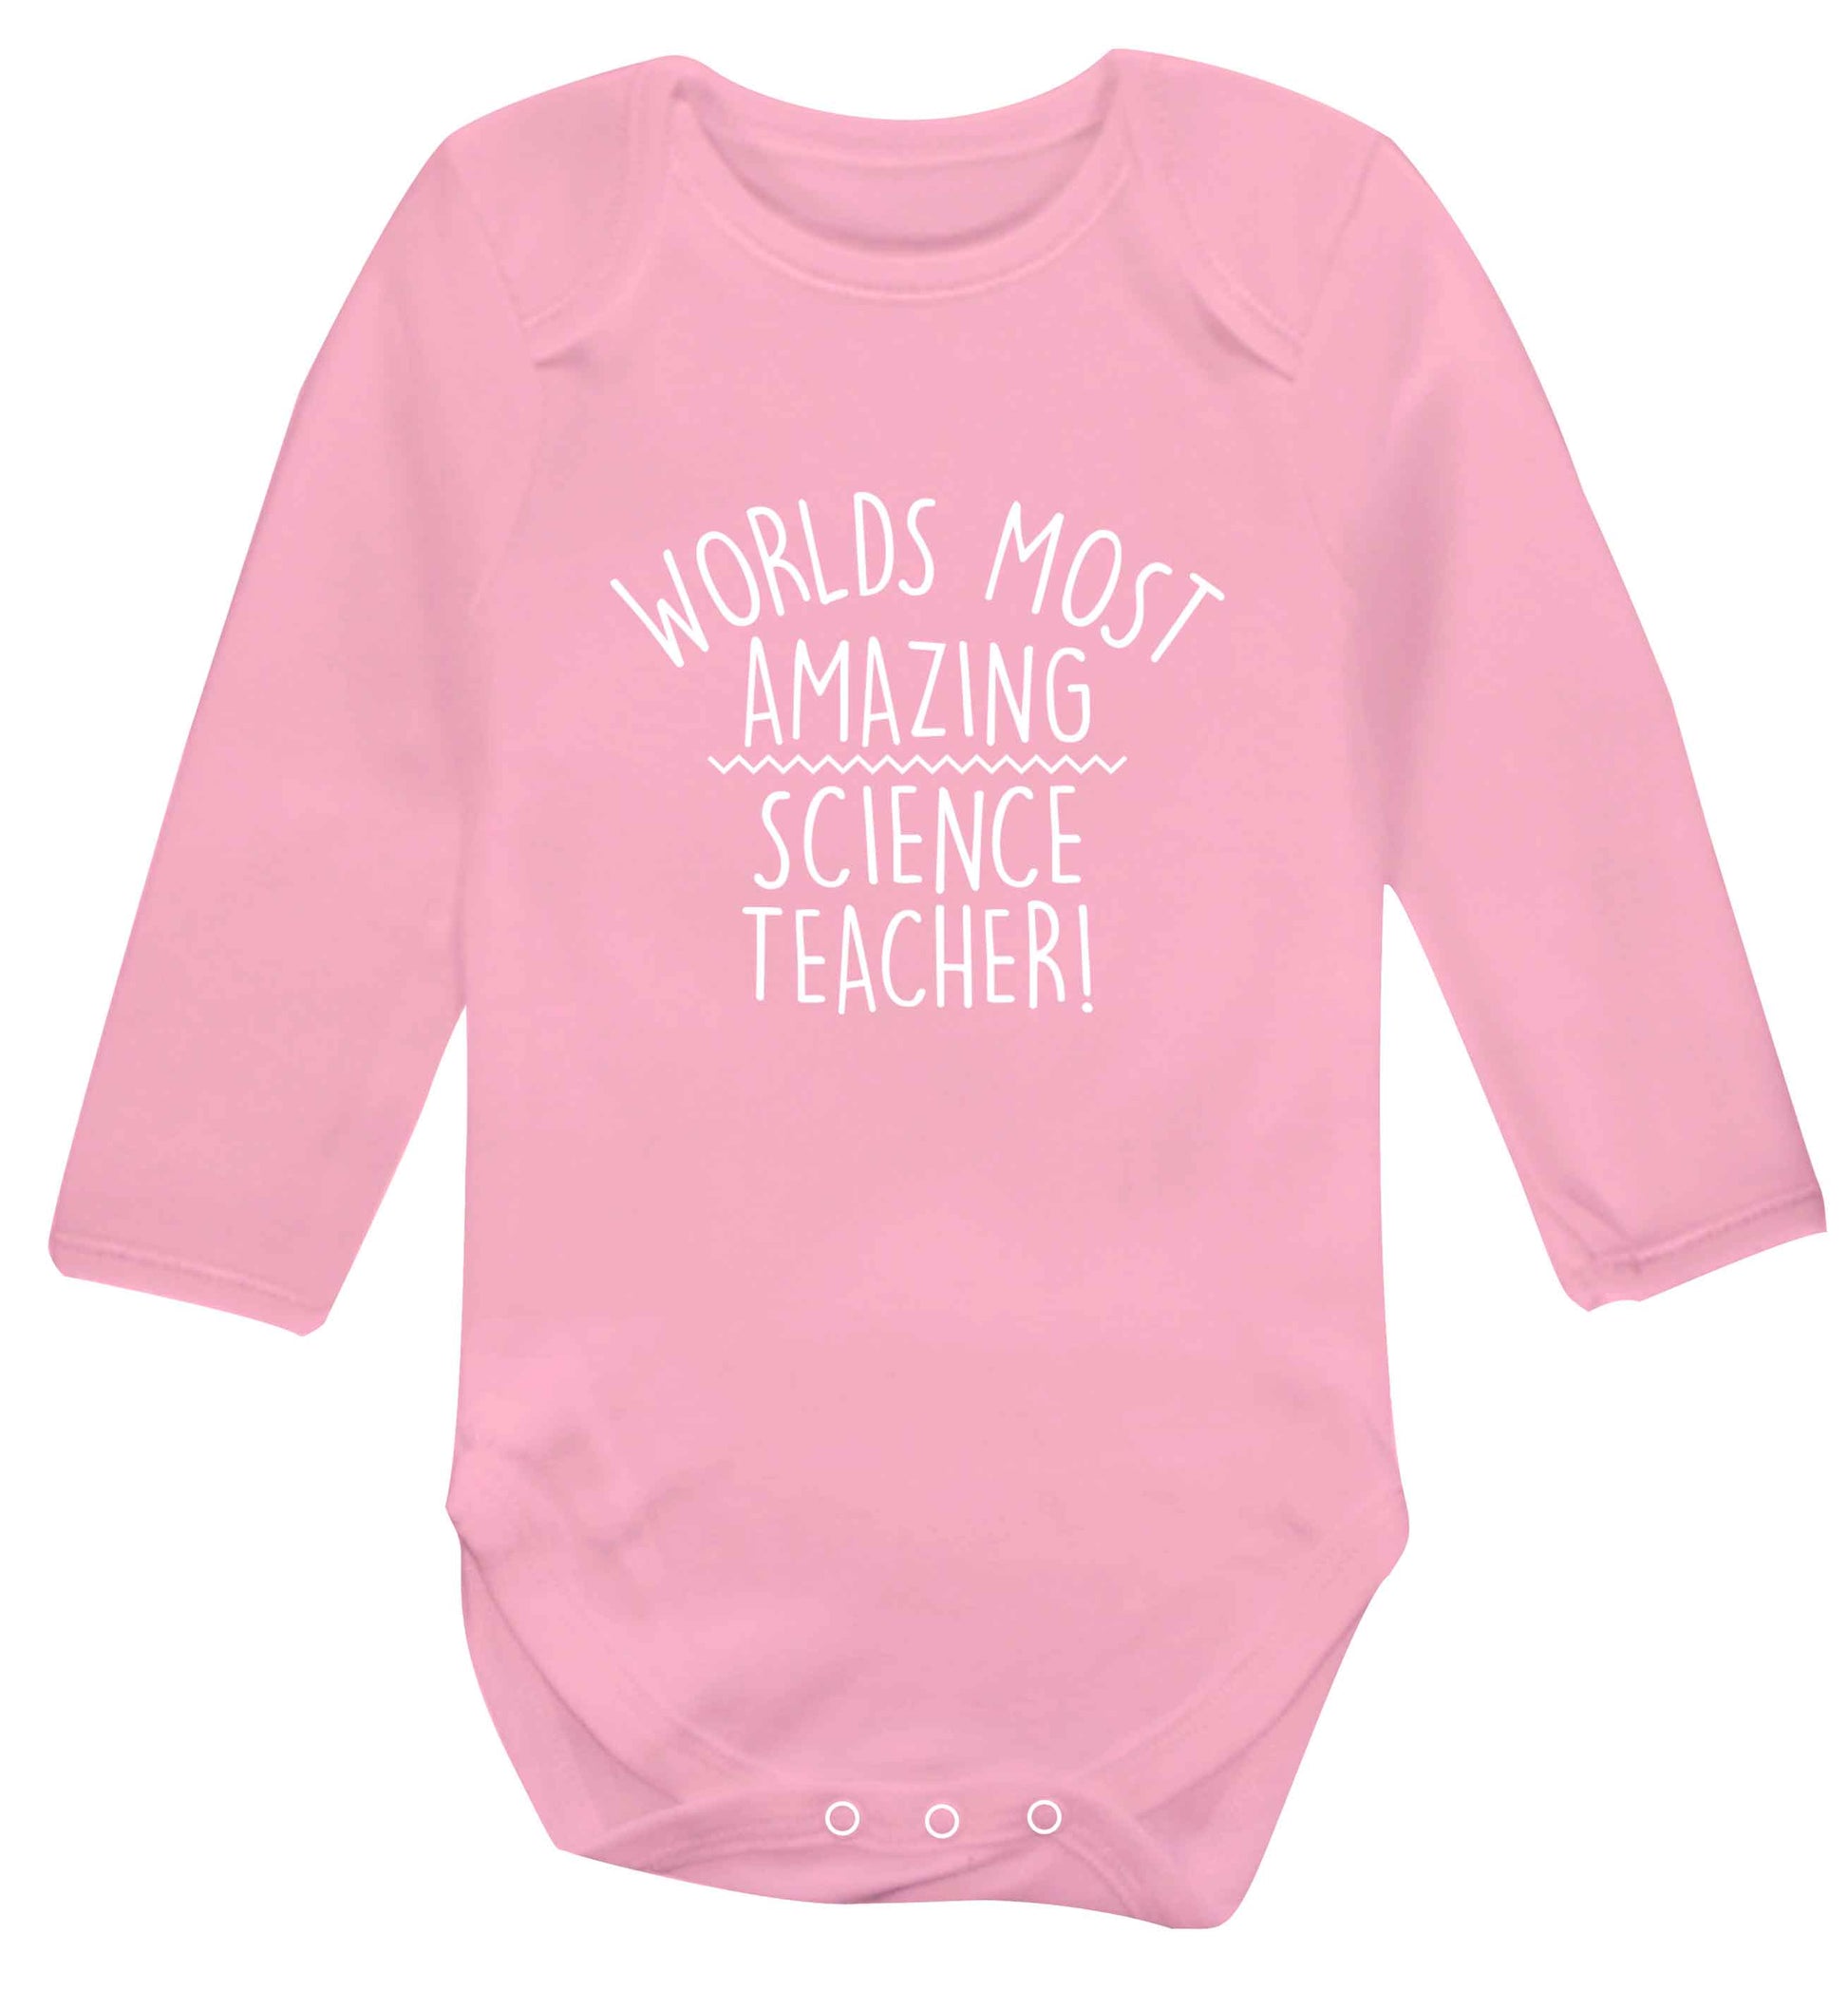 Worlds most amazing science teacher baby vest long sleeved pale pink 6-12 months